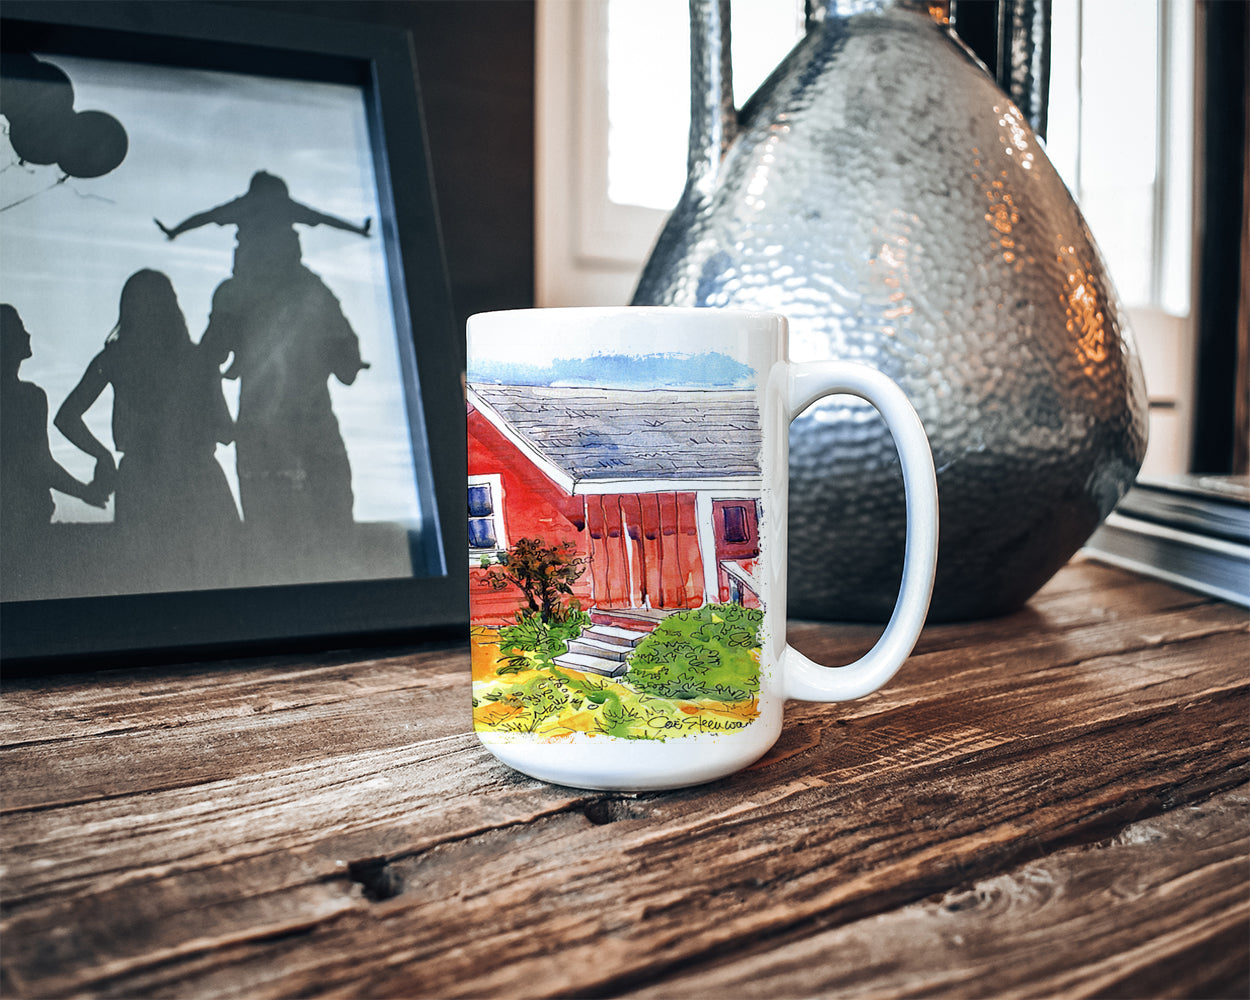 Old Red Cottage House at the lake or Beach Dishwasher Safe Microwavable Ceramic Coffee Mug 15 ounce 6041CM15  the-store.com.